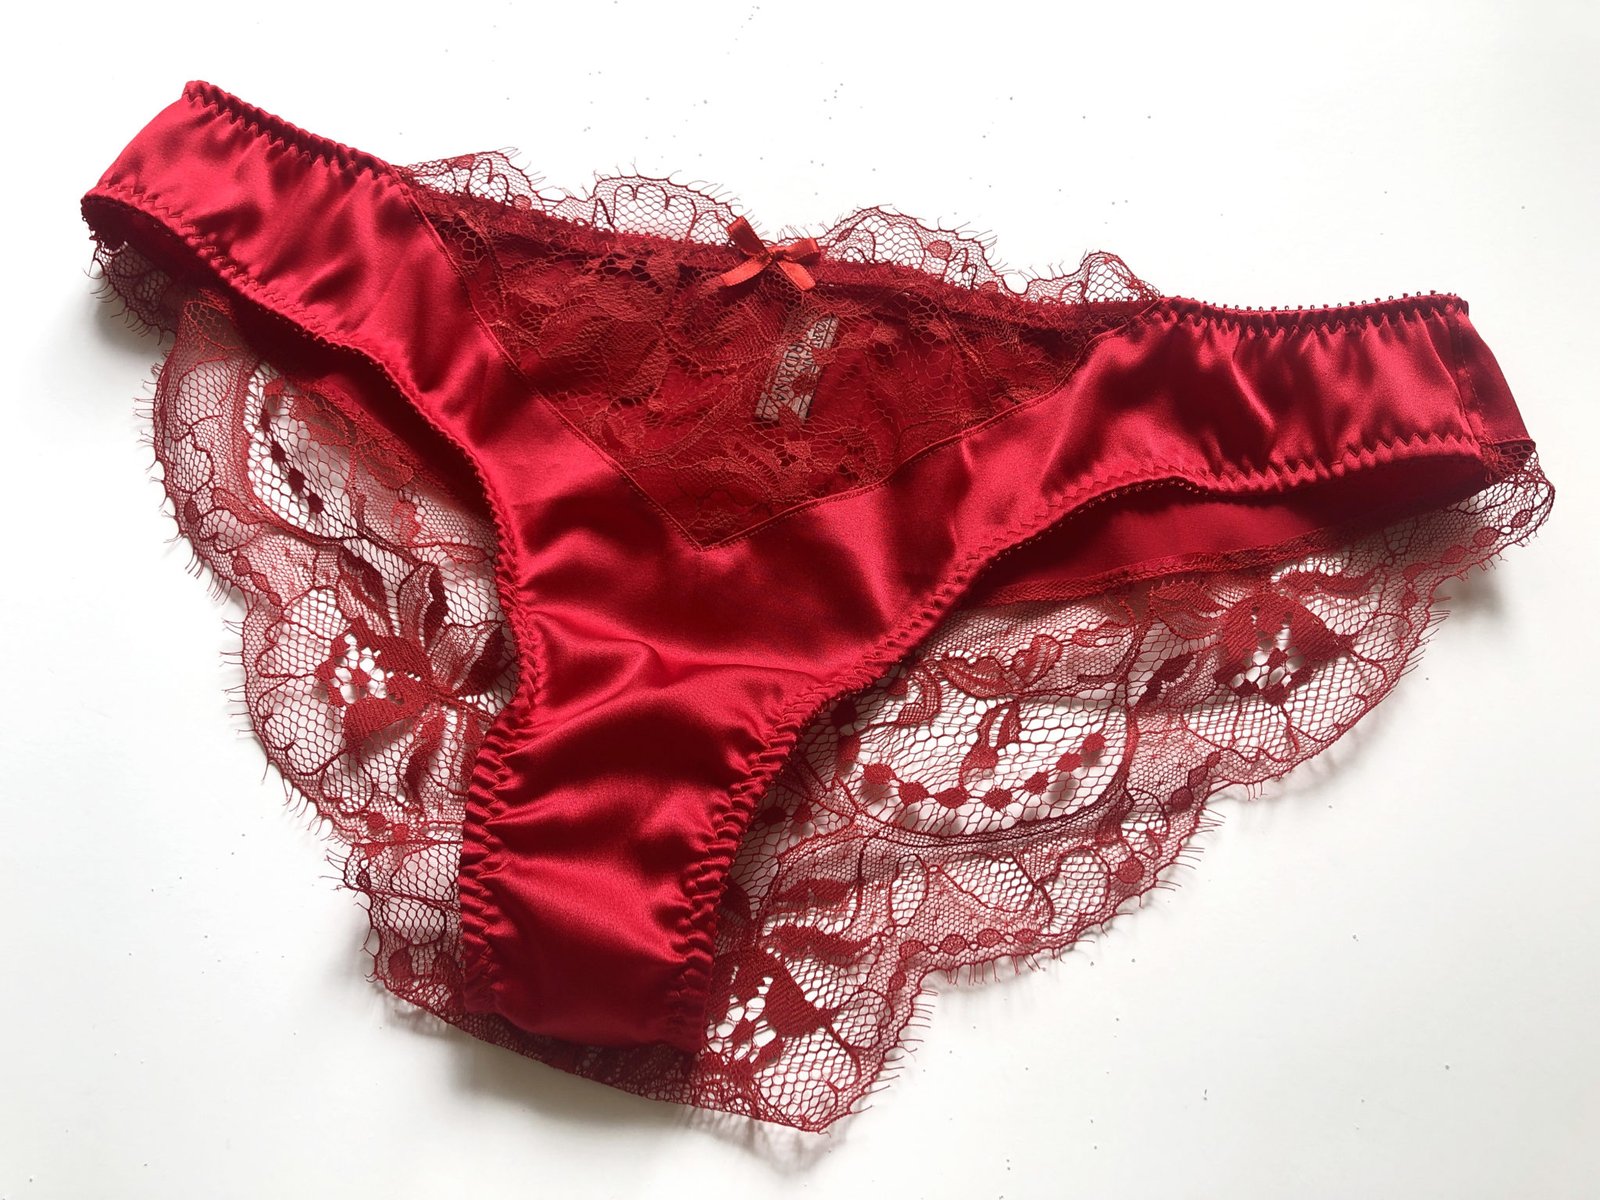 This Red Silk Lingerie Is A Must Have Panties Elegant And Sexy 6015